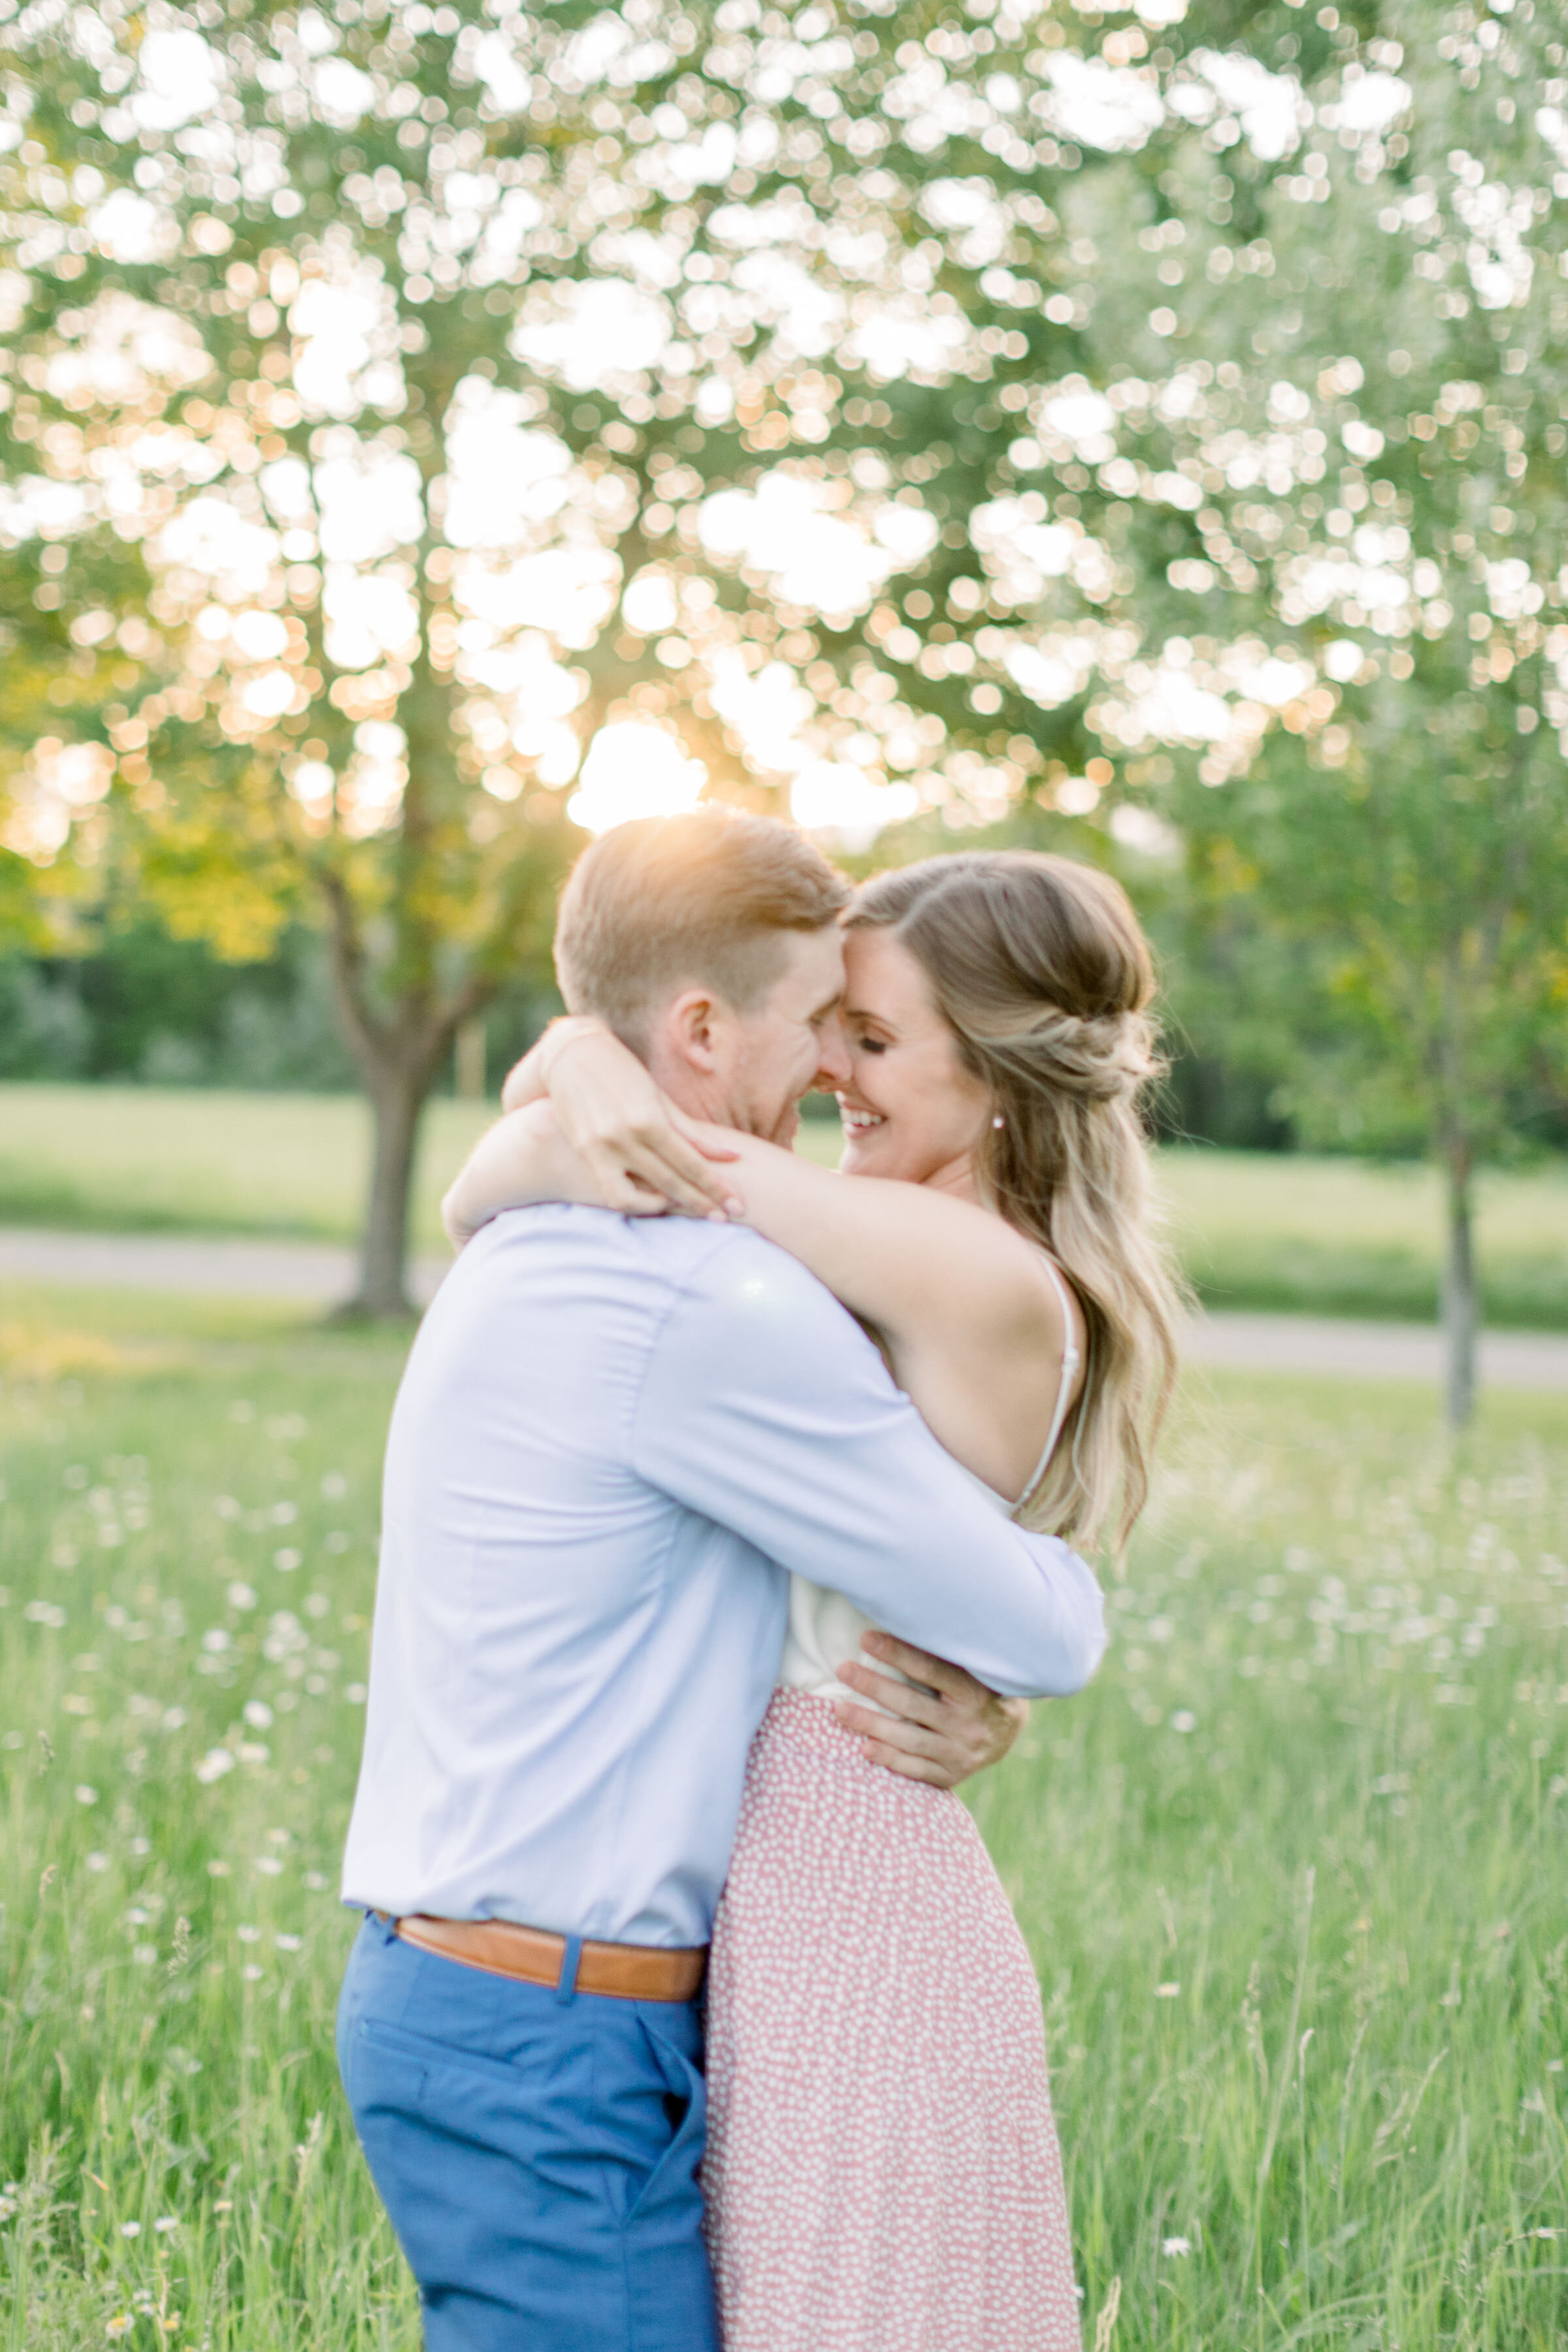  Perfect outdoor lighting right at dusk with sun peeking through trees for this engagement photoshoot in Ottawa, ON by Chelsea Mason Photography. perfect photo lighting lights in trees how to capture perfect lighting outdoor engagement locations in o